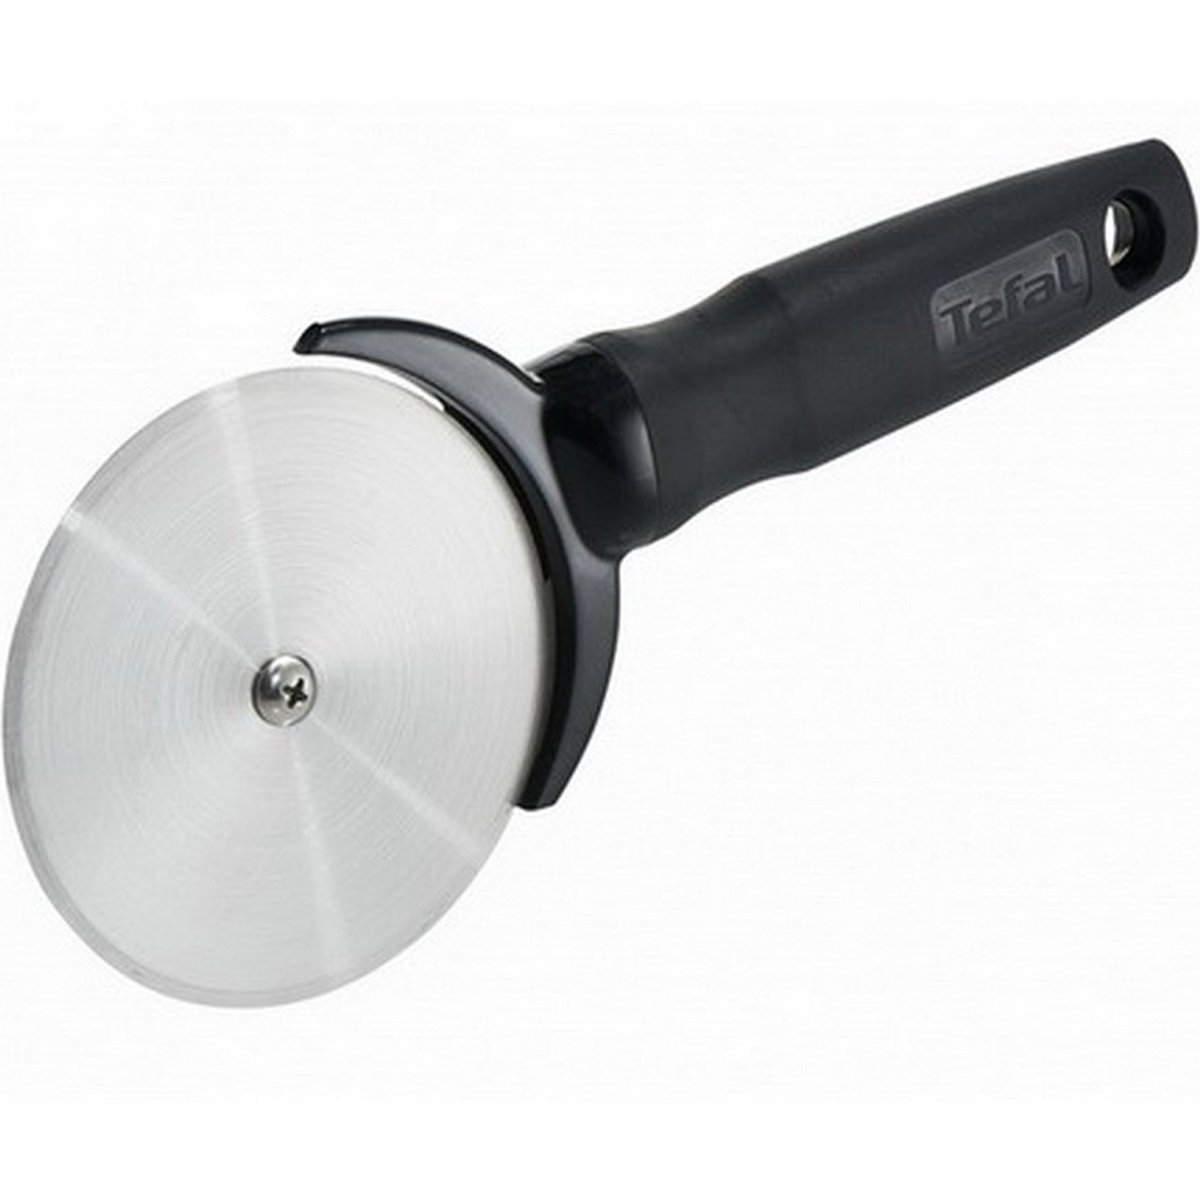 Tefal Comfort Touch Pizza Cutter K0690314